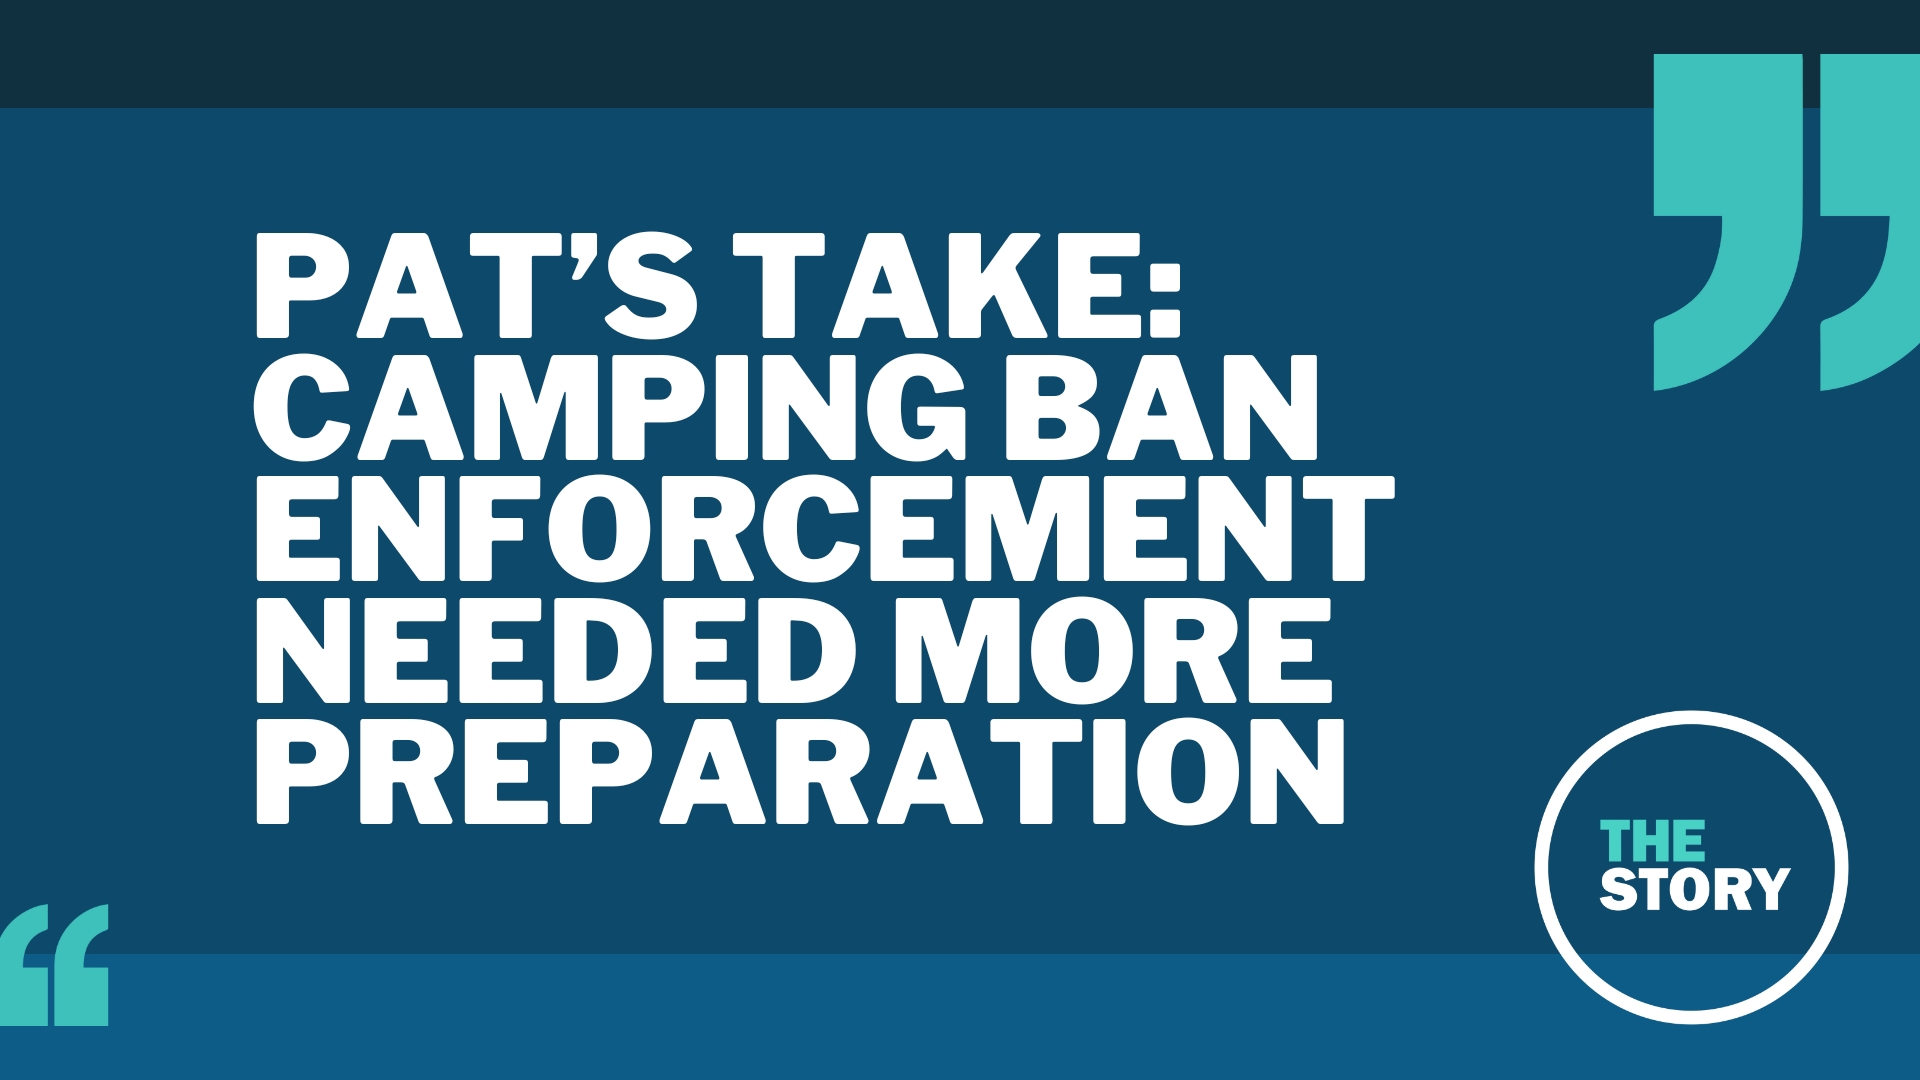 Despite weeks of warnings and preparation, little to no actual enforcement action was visible when the ban officially went into effect on July 1.